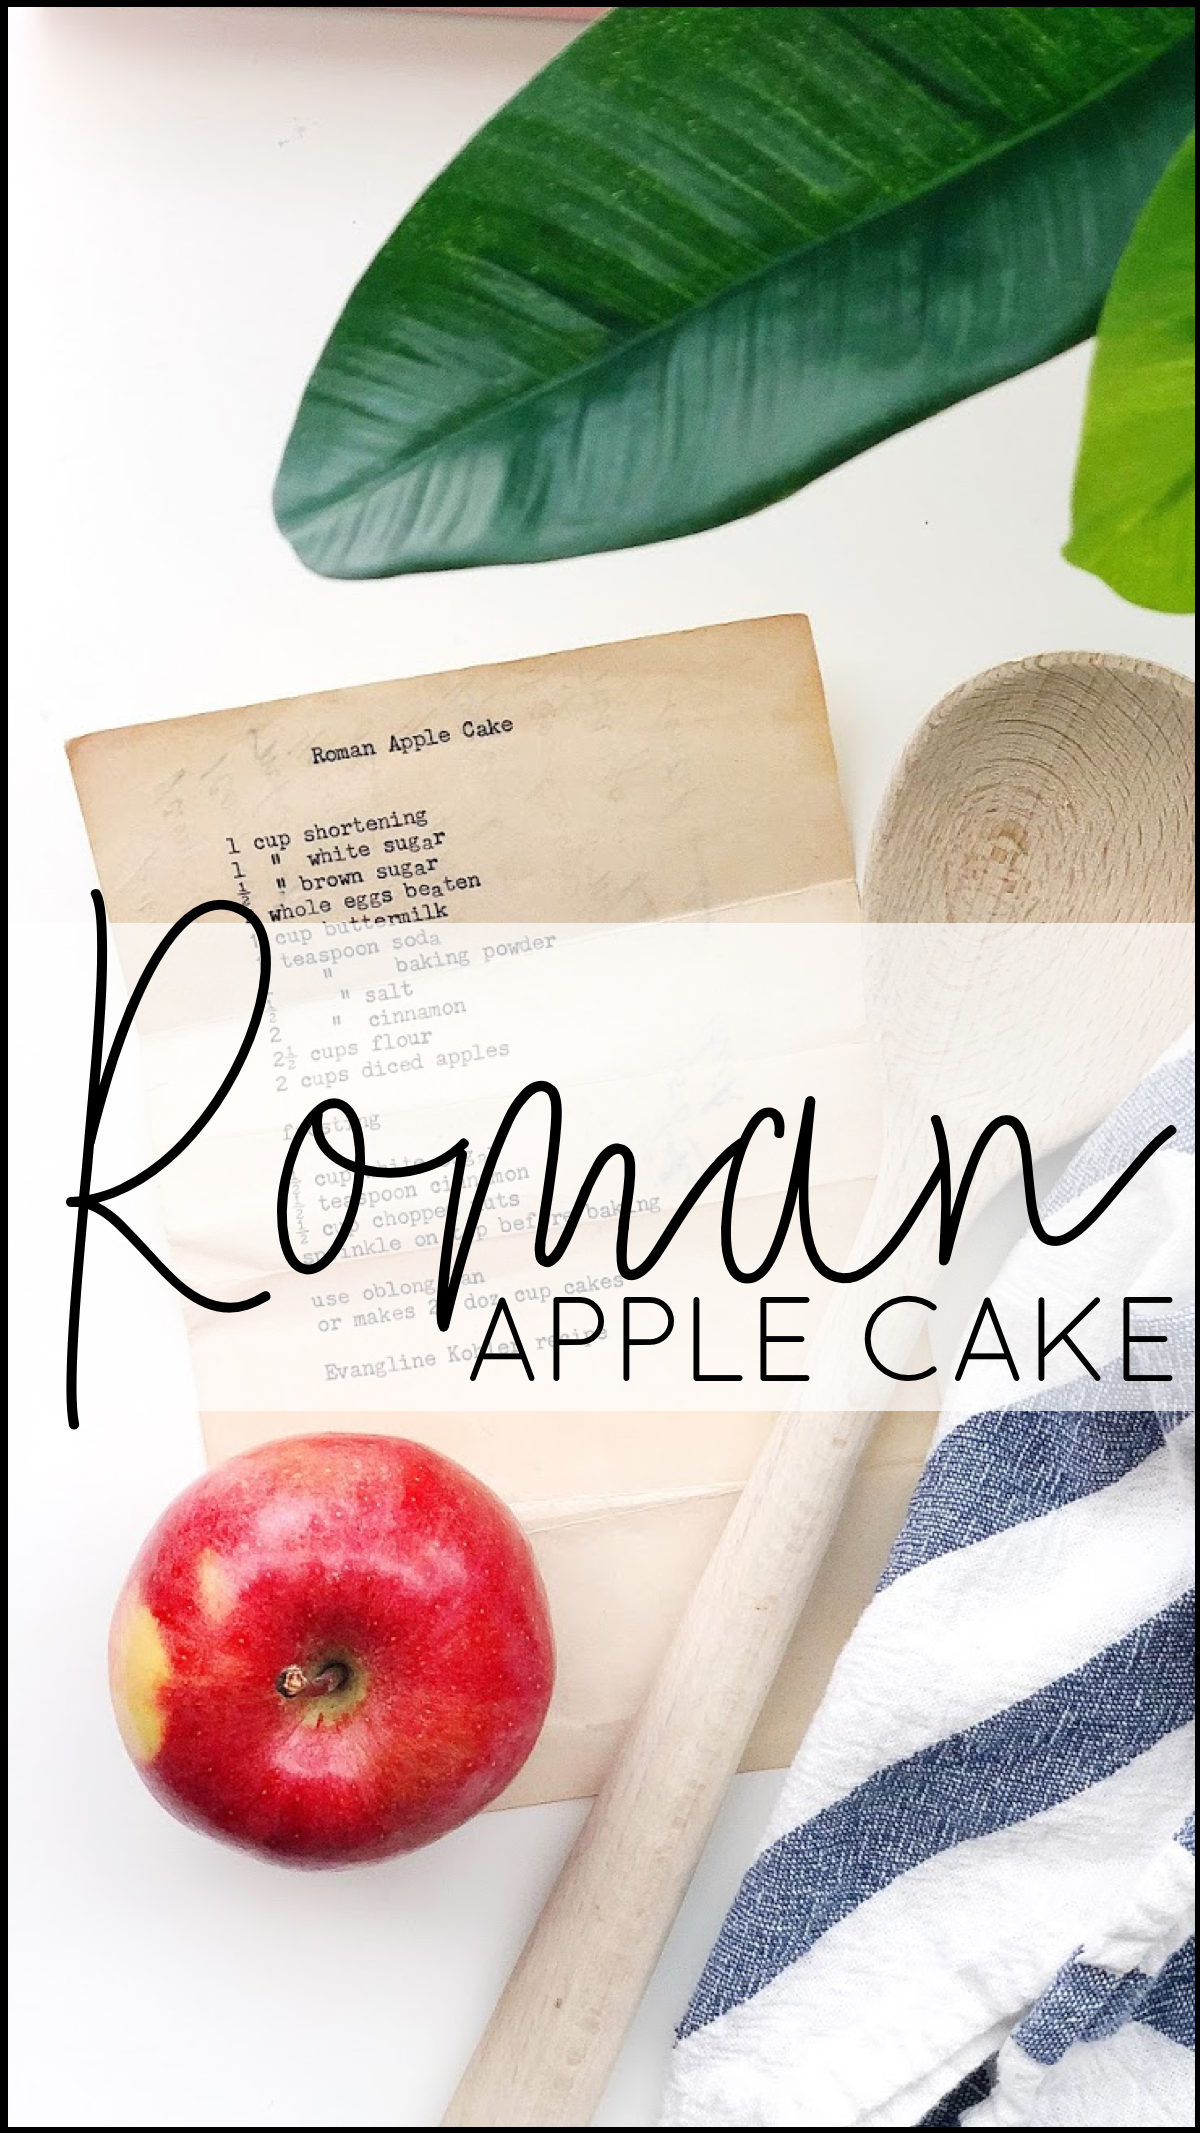 This Roman Apple Cake recipe is a delicious addition to your fall baking. The combination of fresh Granny Smith apples, buttermilk, and cinnamon will have your kitchen smelling absolutely divine! It's quick and easy enough for beginner bakers, but will please the palette of intermediate bakers, too! Perfect to serve warm alongside vanilla ice cream for an after dinner dessert or with a cup of coffee for breakfast on a crisp fall morning!